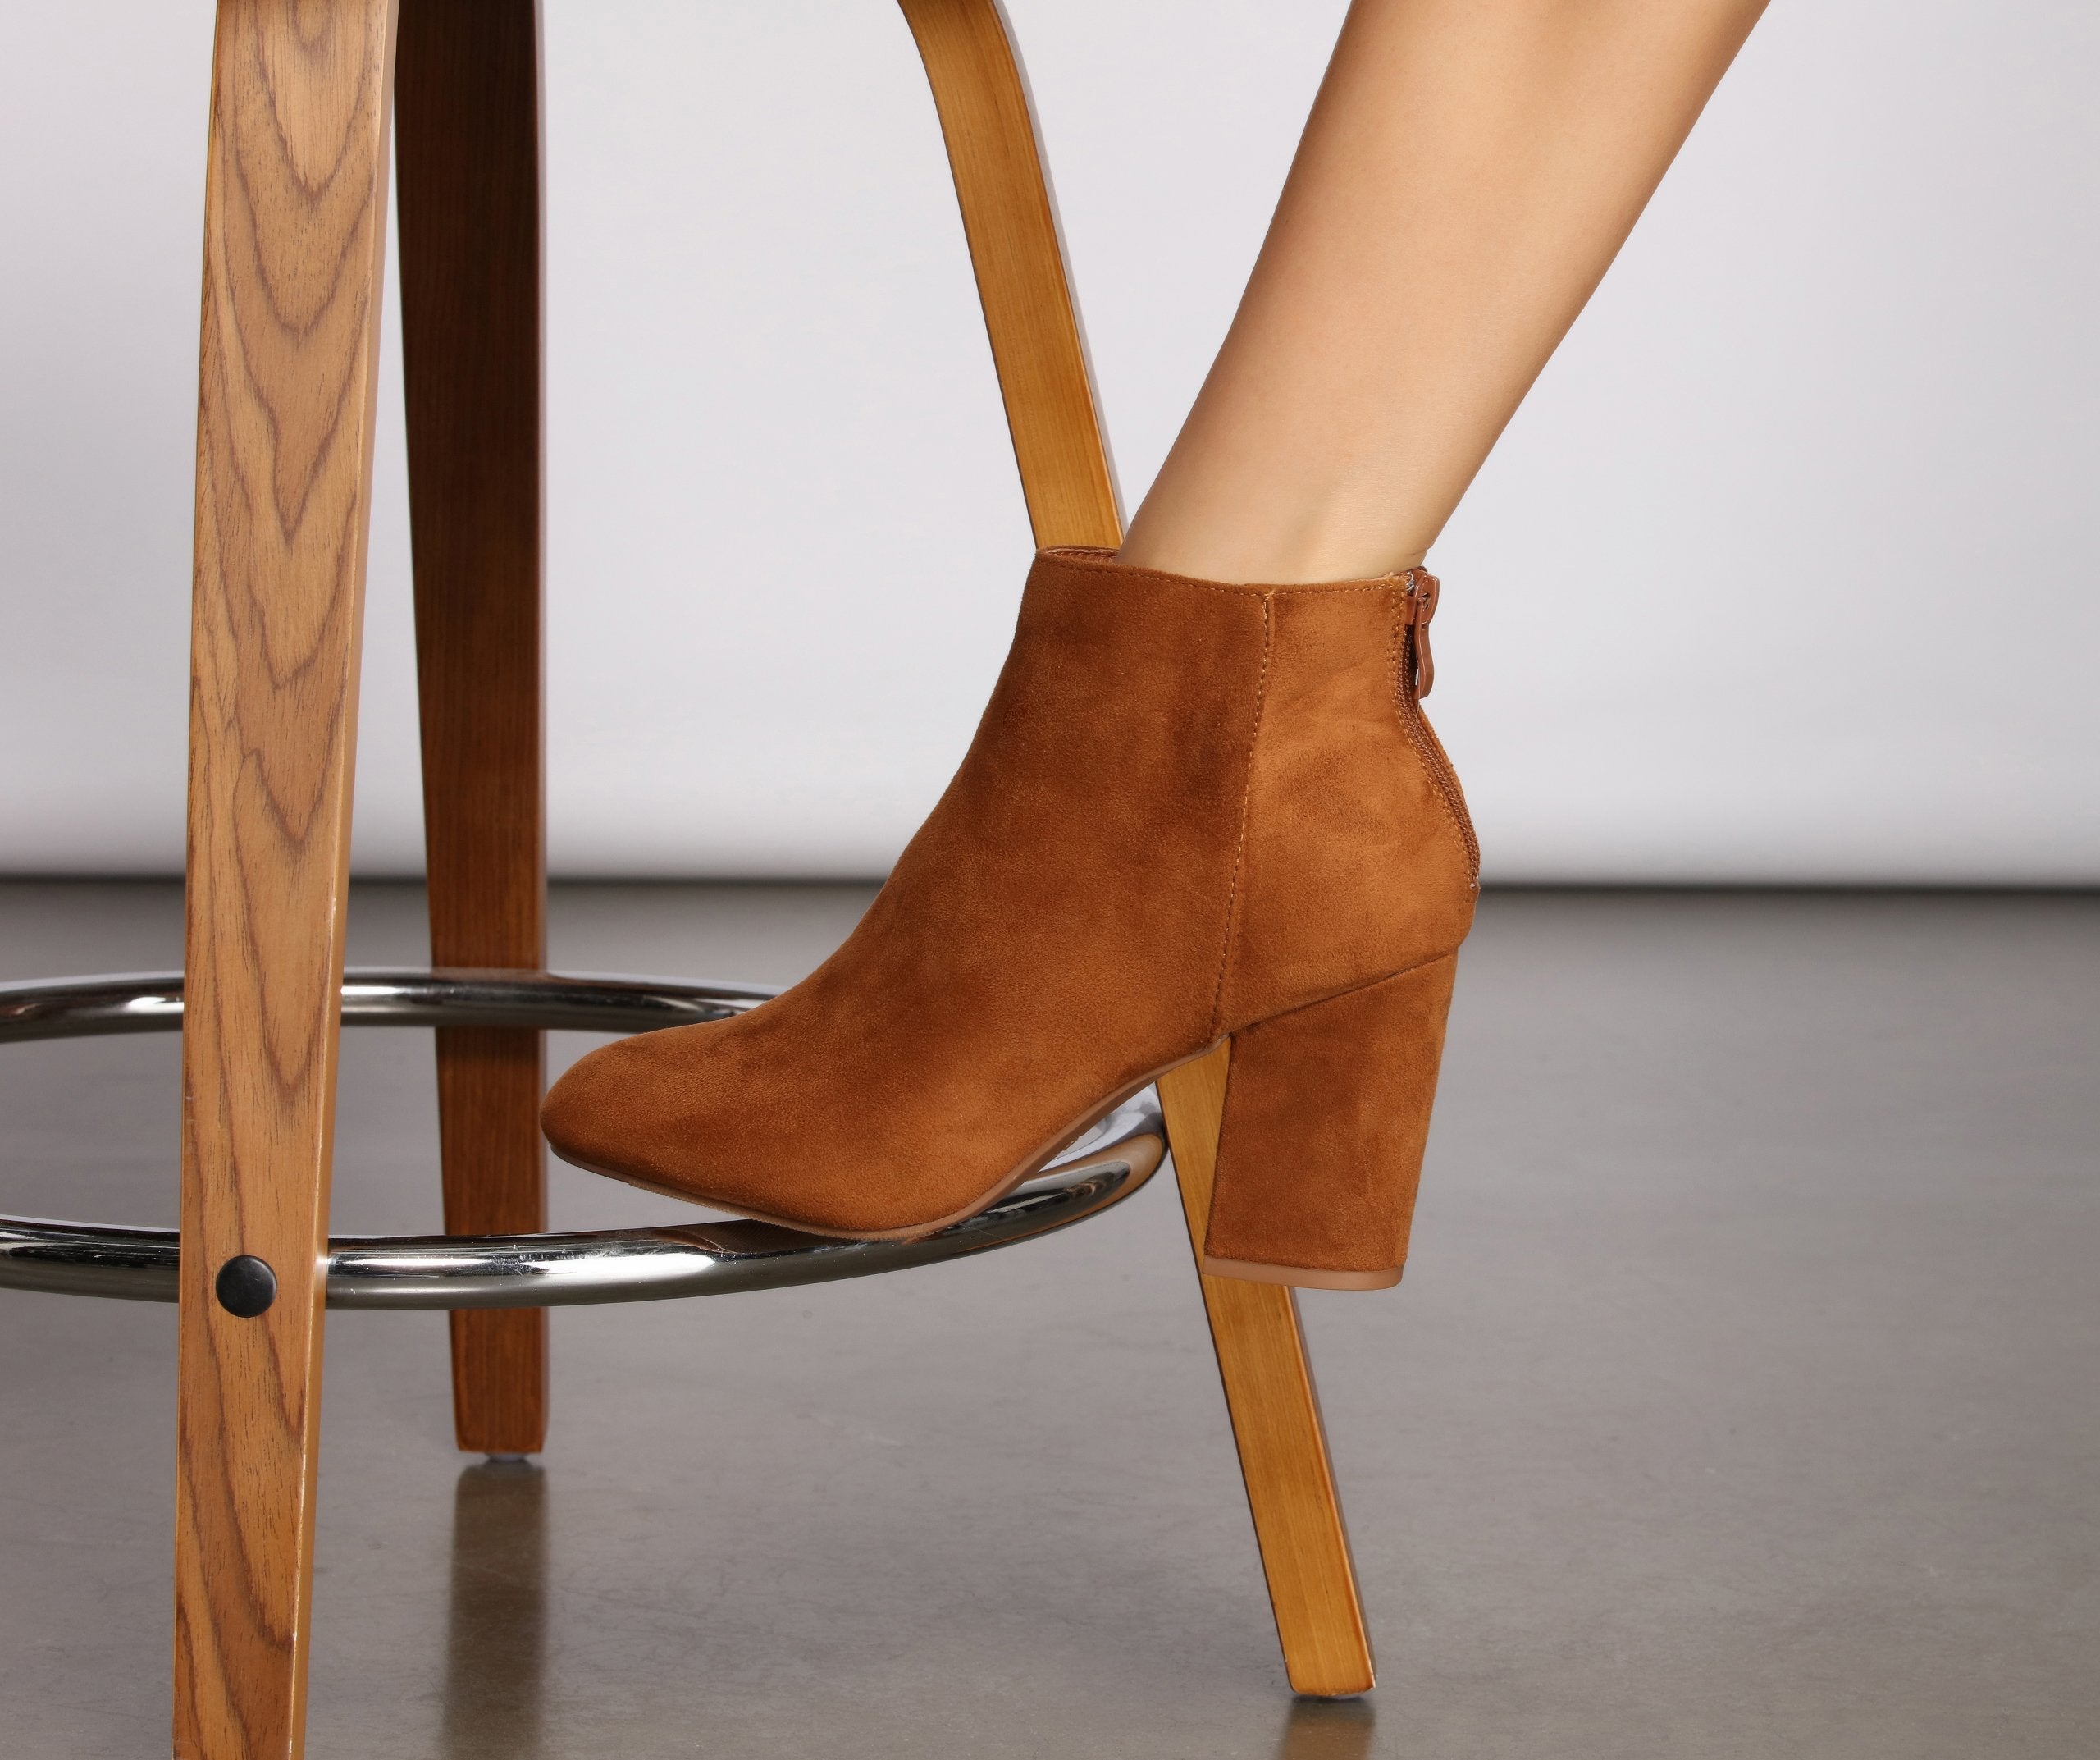 Slay In Basic Faux Suede Booties